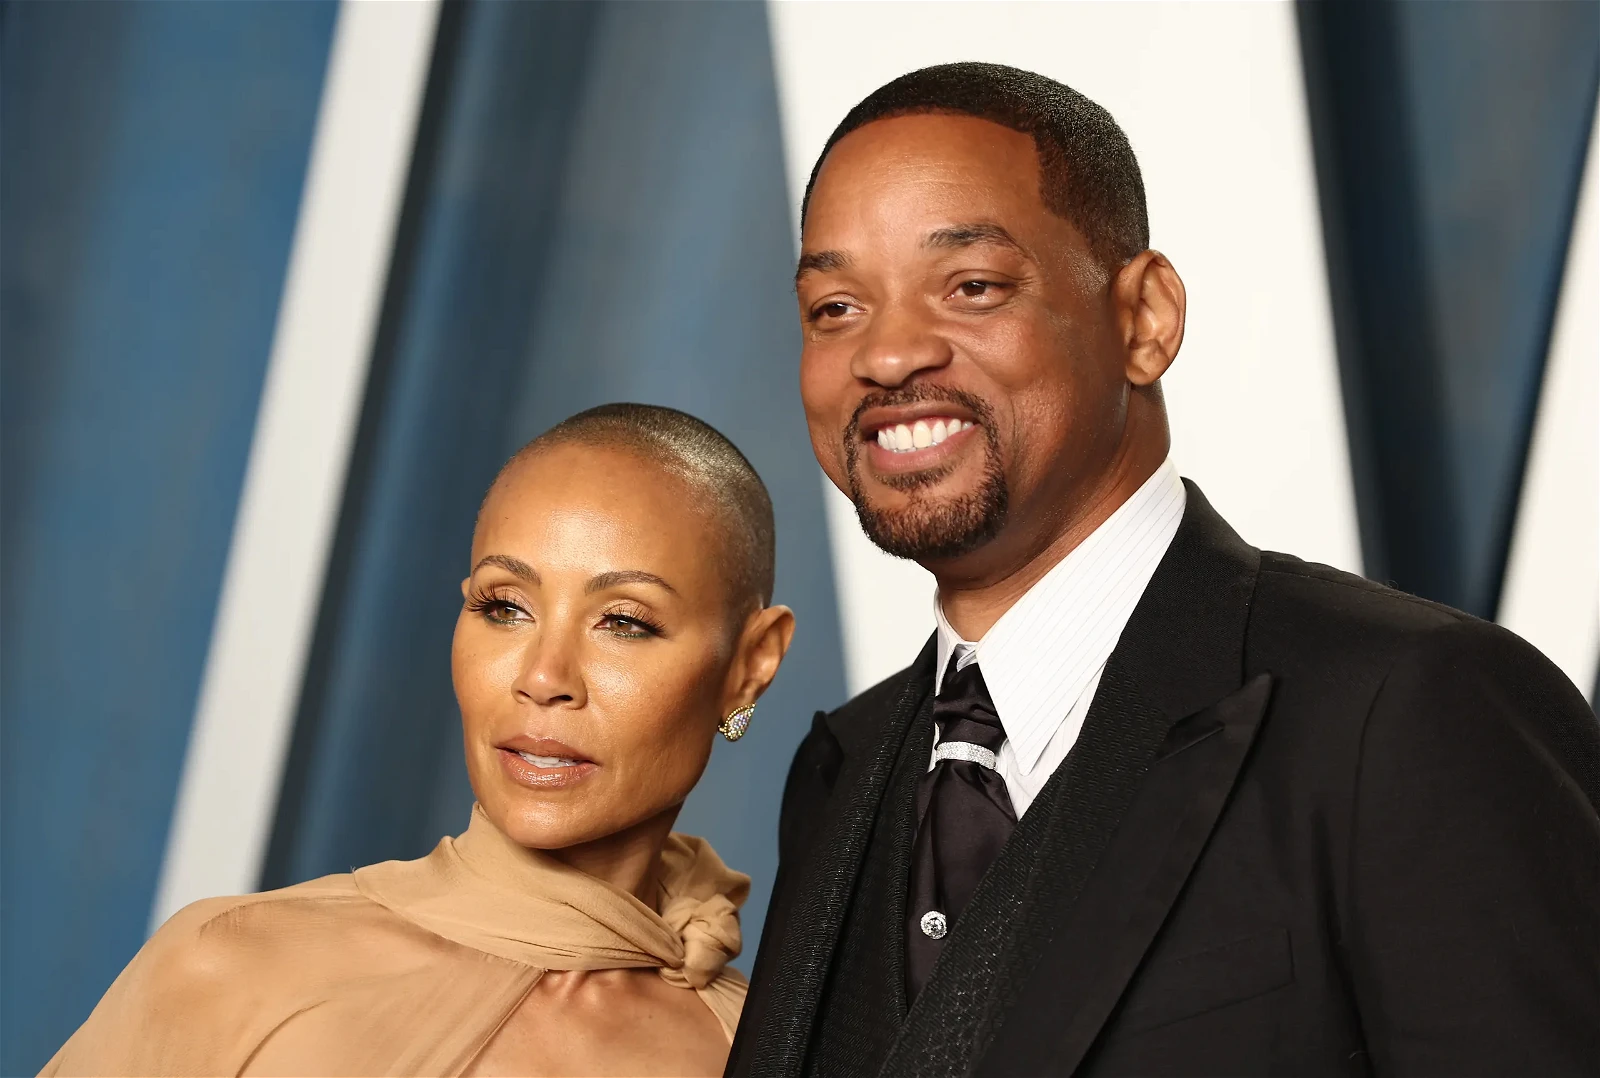 Jada Smith and Will Smith at an event